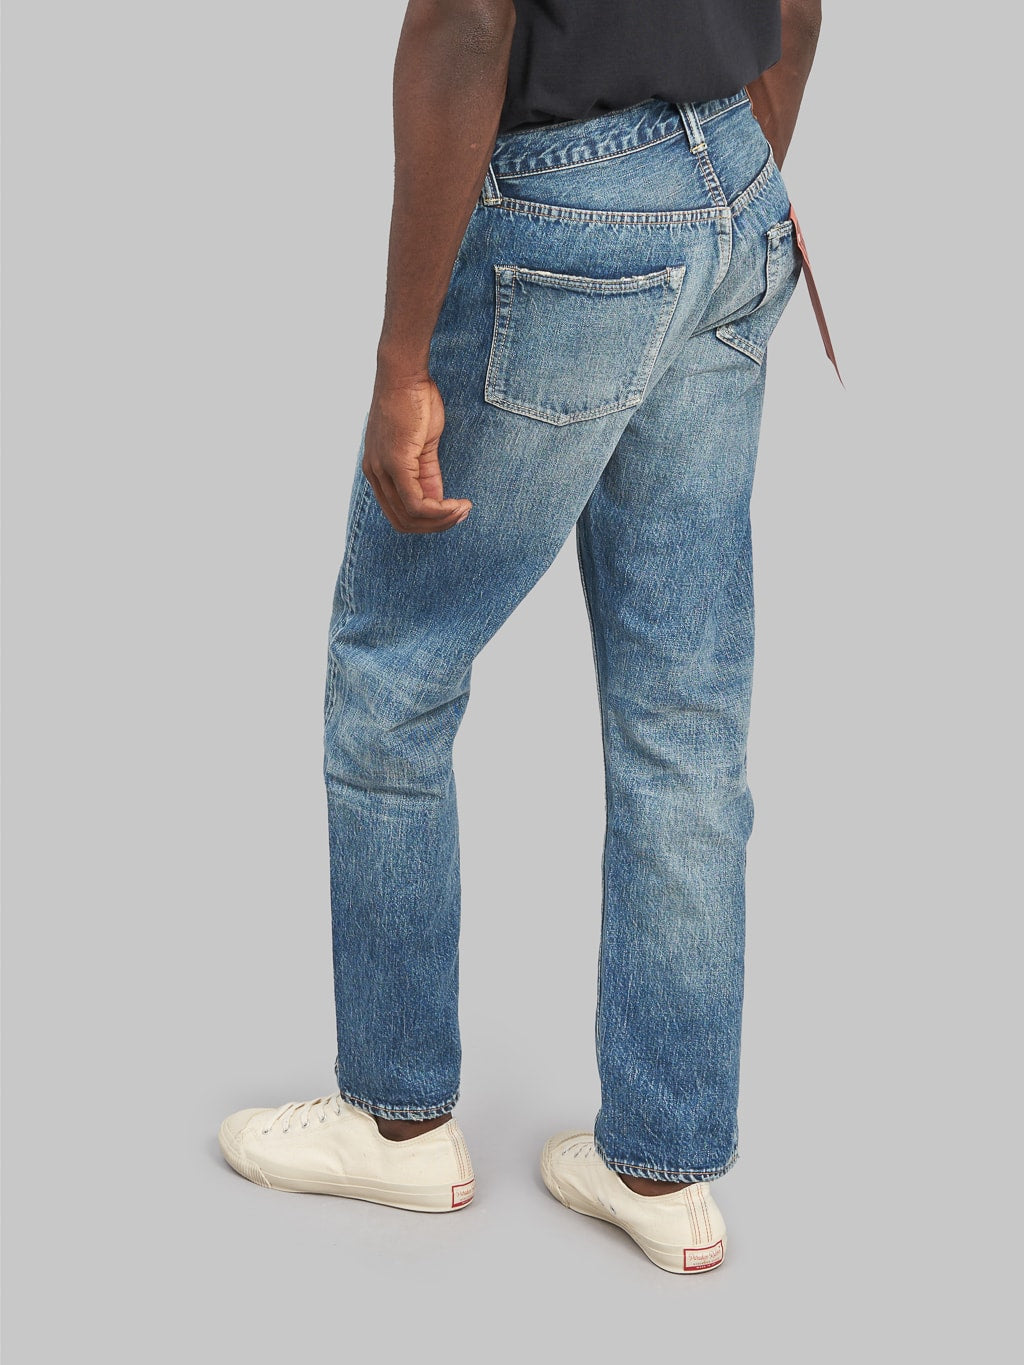 Fullcount 1101 Dartford wide Straight Jeans style